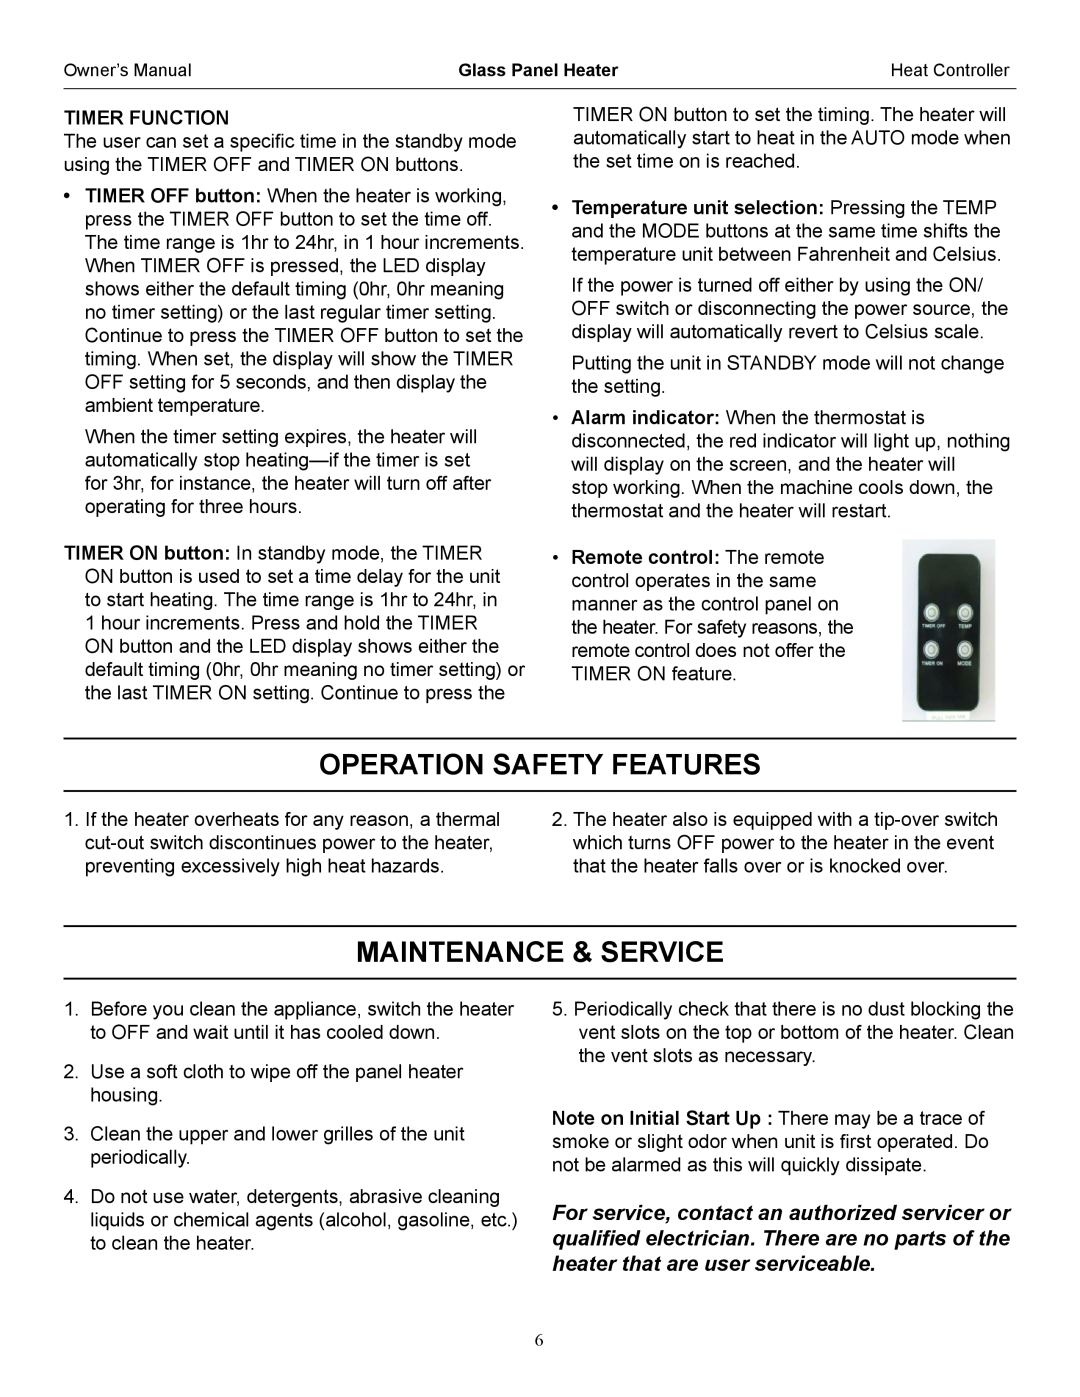 Heat Controller IRGPH15B operation manual Operation Safety Features, Maintenance & Service 